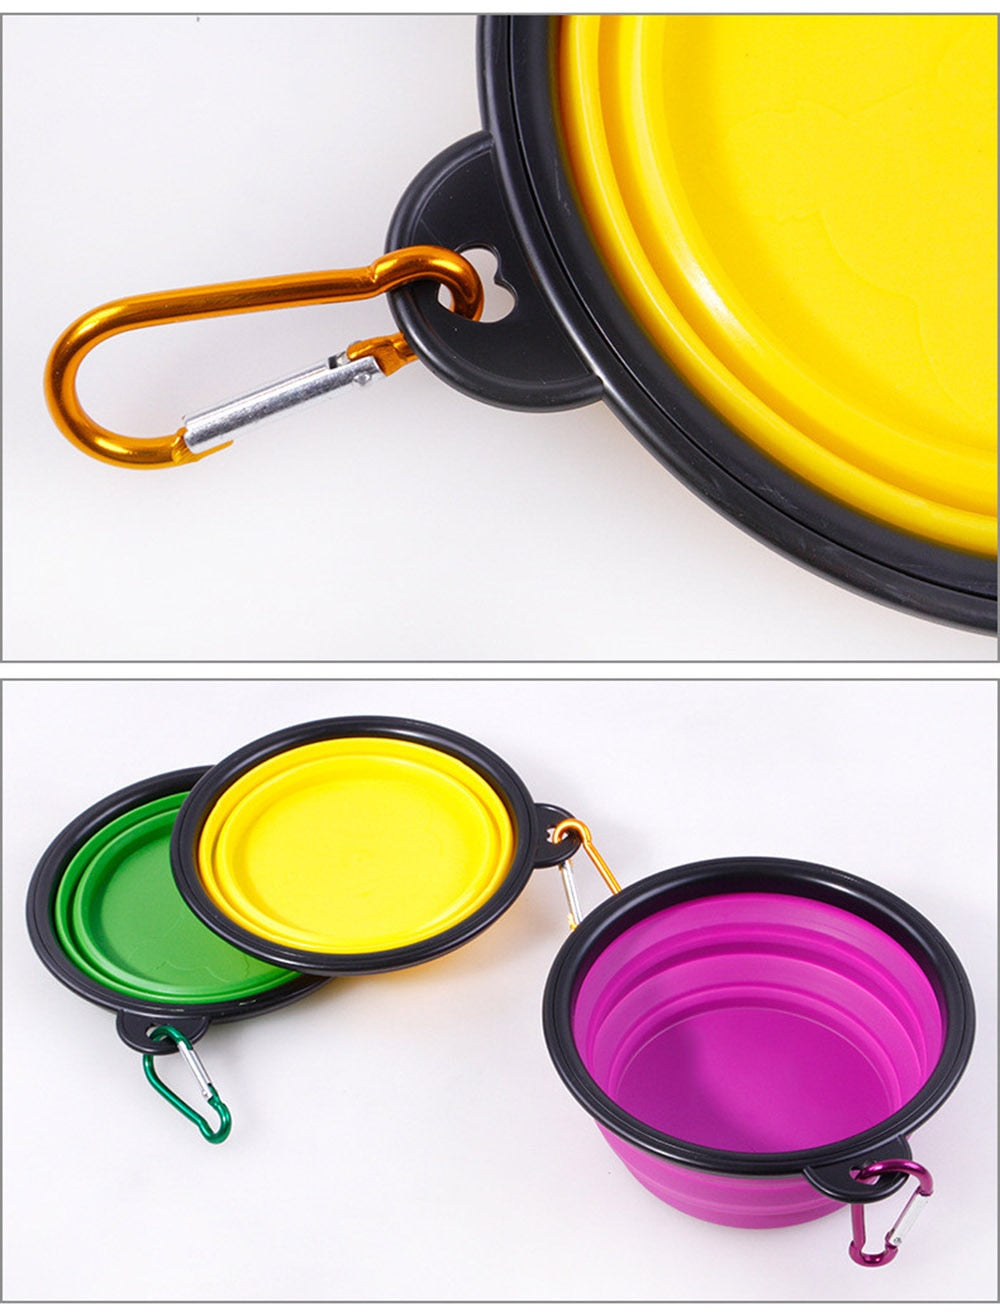 Foldable Collapsible Silicone Pet Bowl for Travel and Outdoors